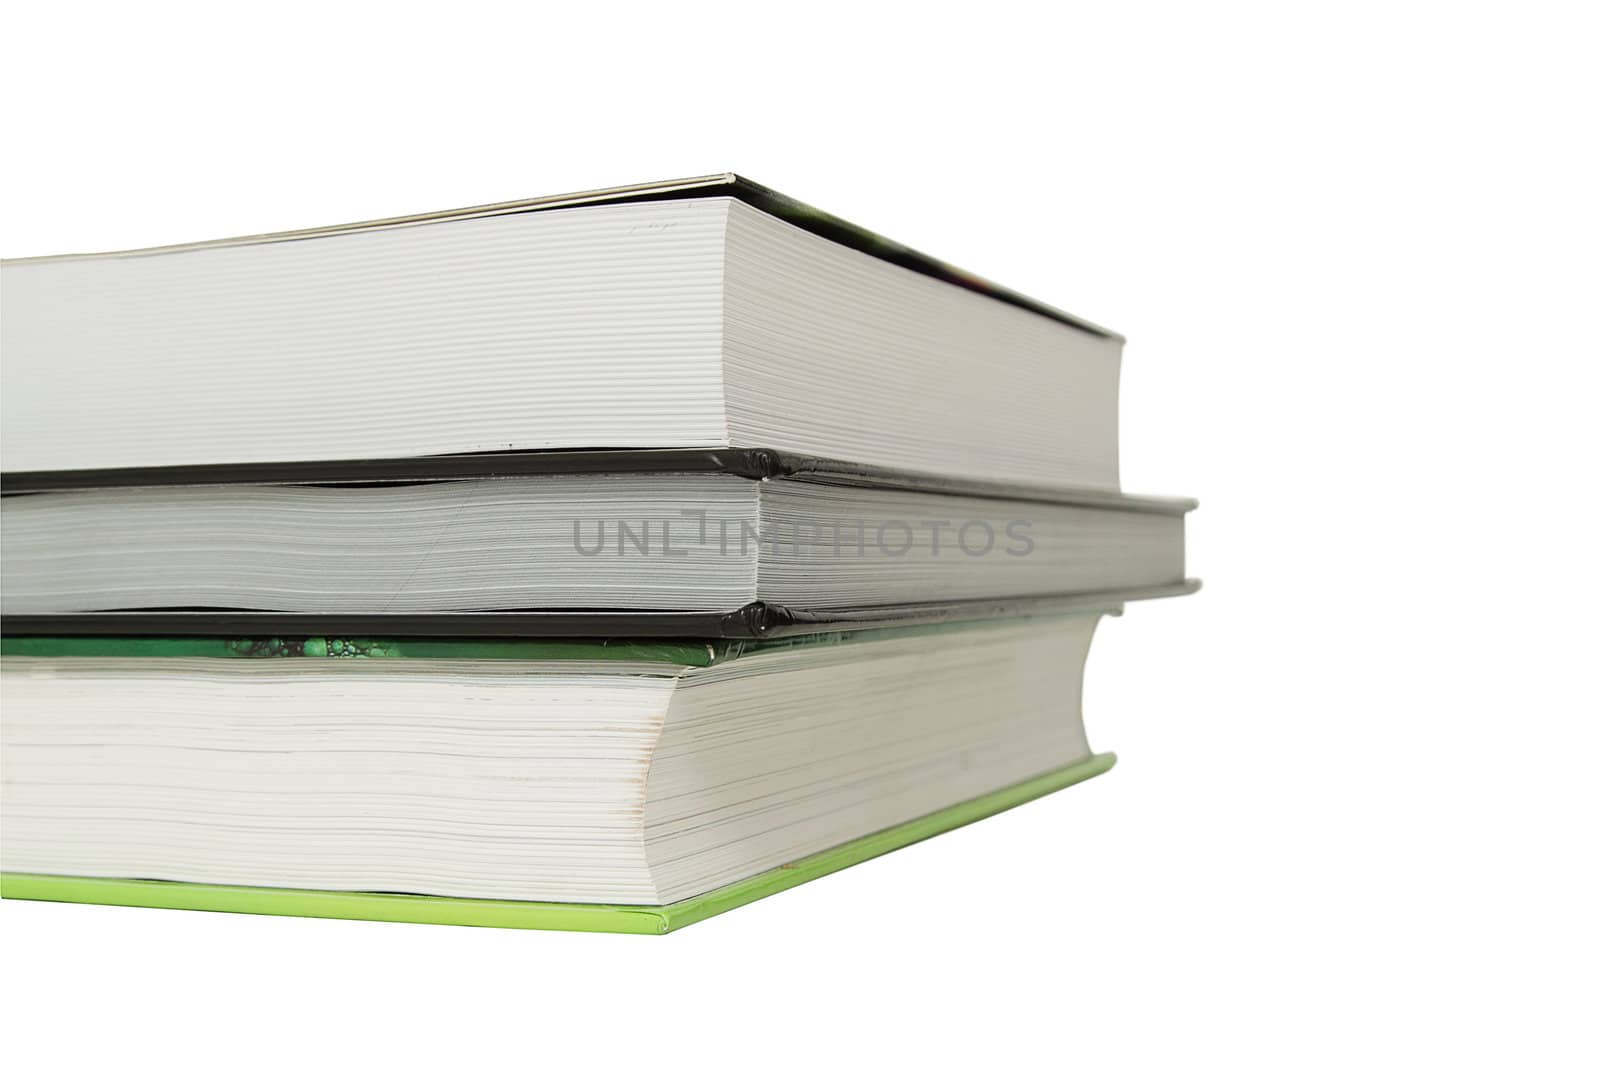 Stack of three books over white background